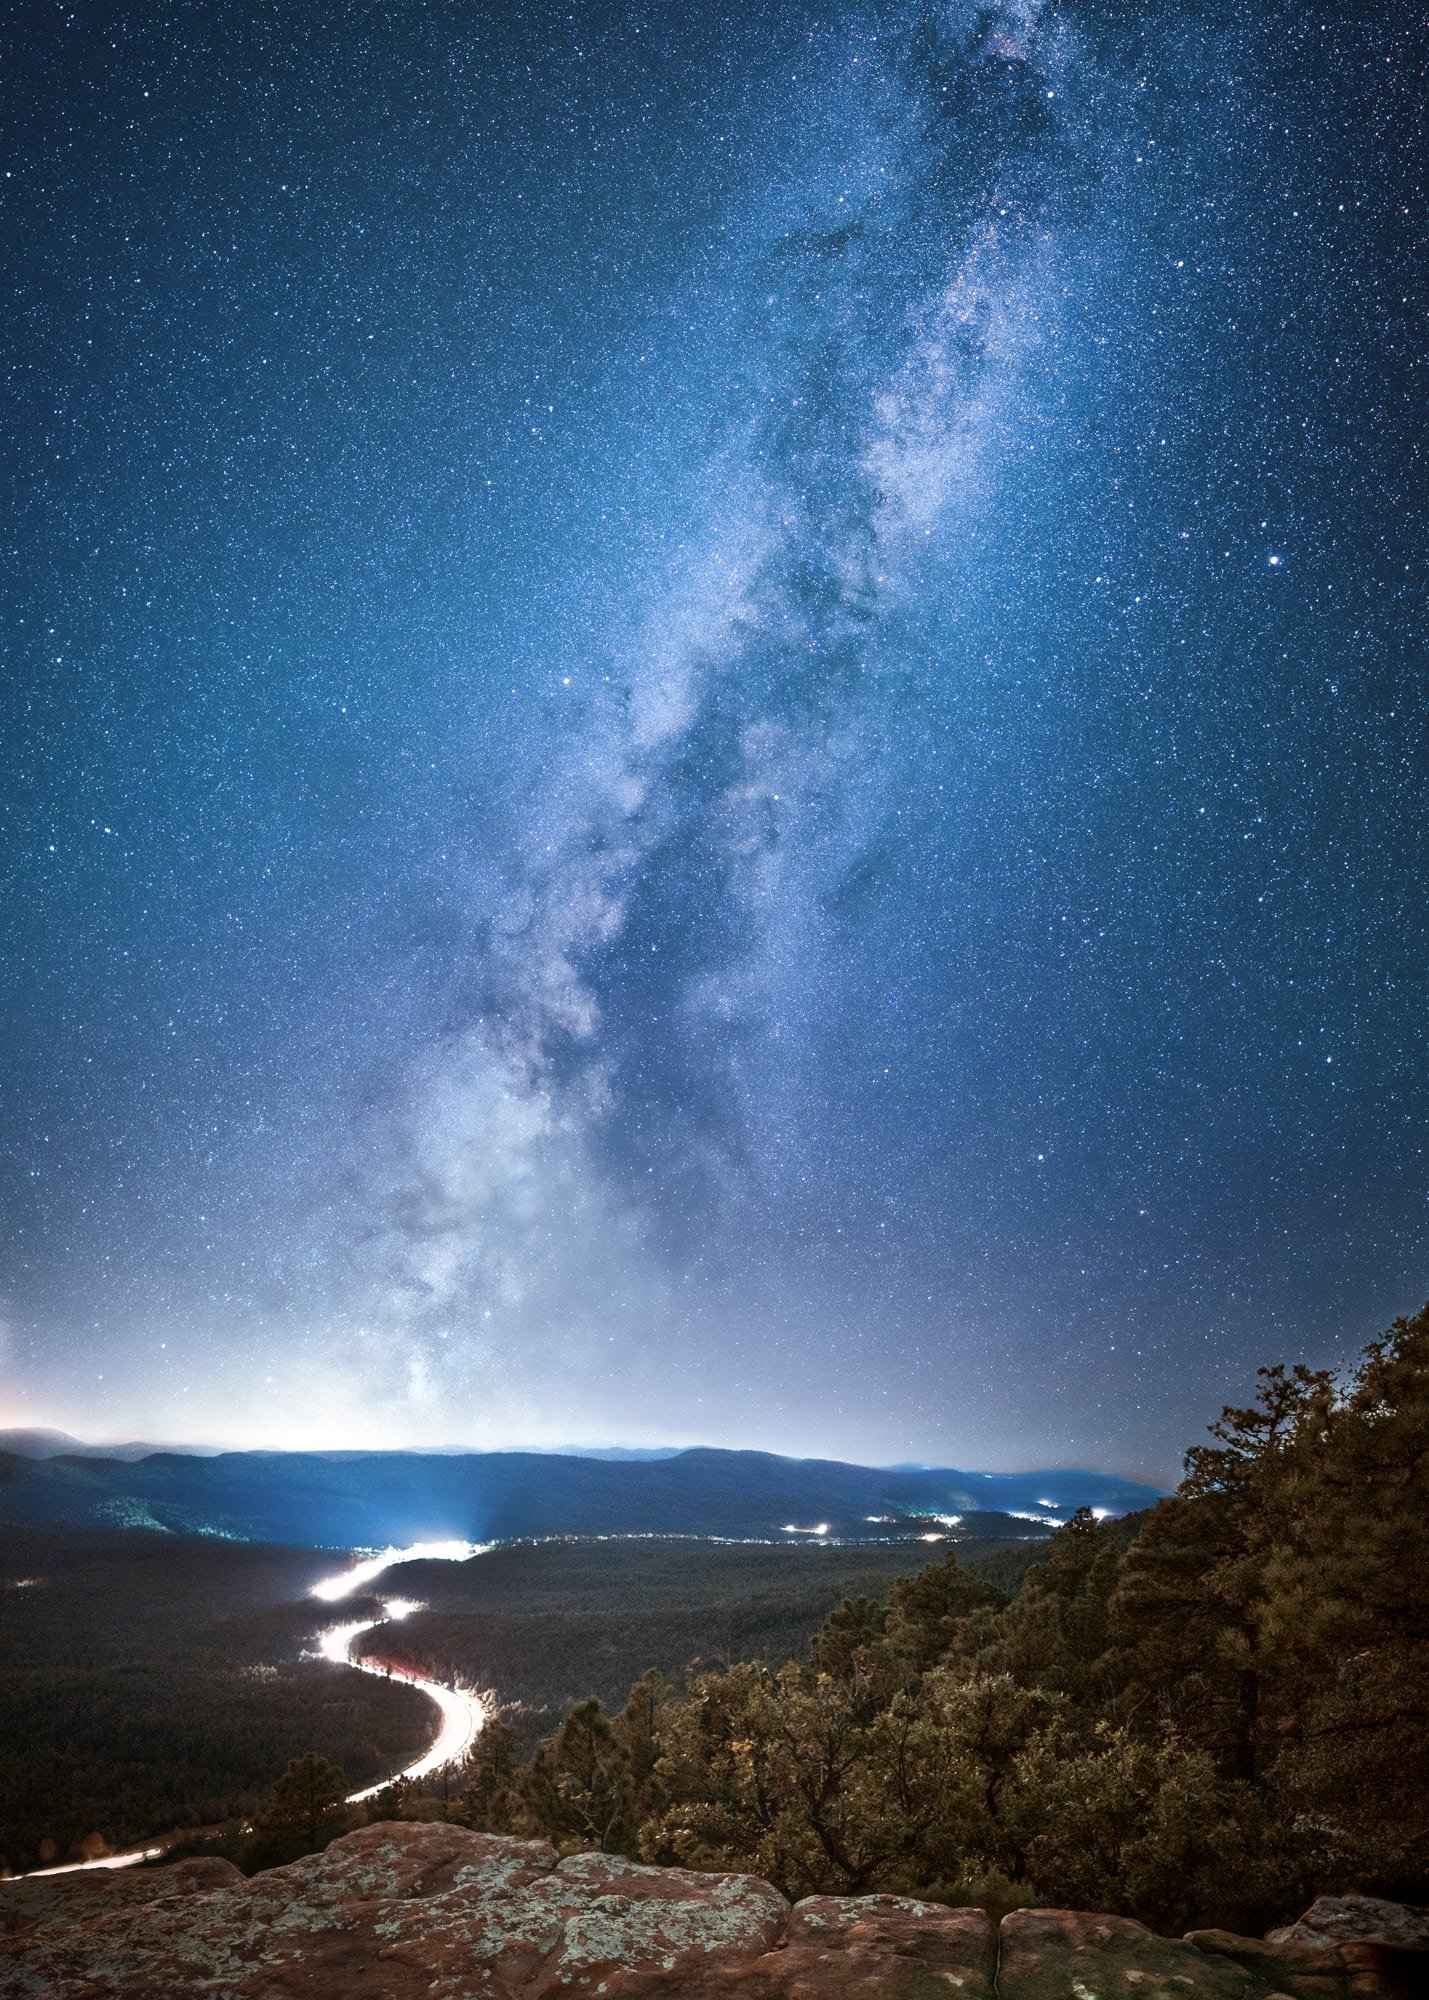 image from the Mogollon Rim in Arizona overseeing a highway of light with the Milky Way.